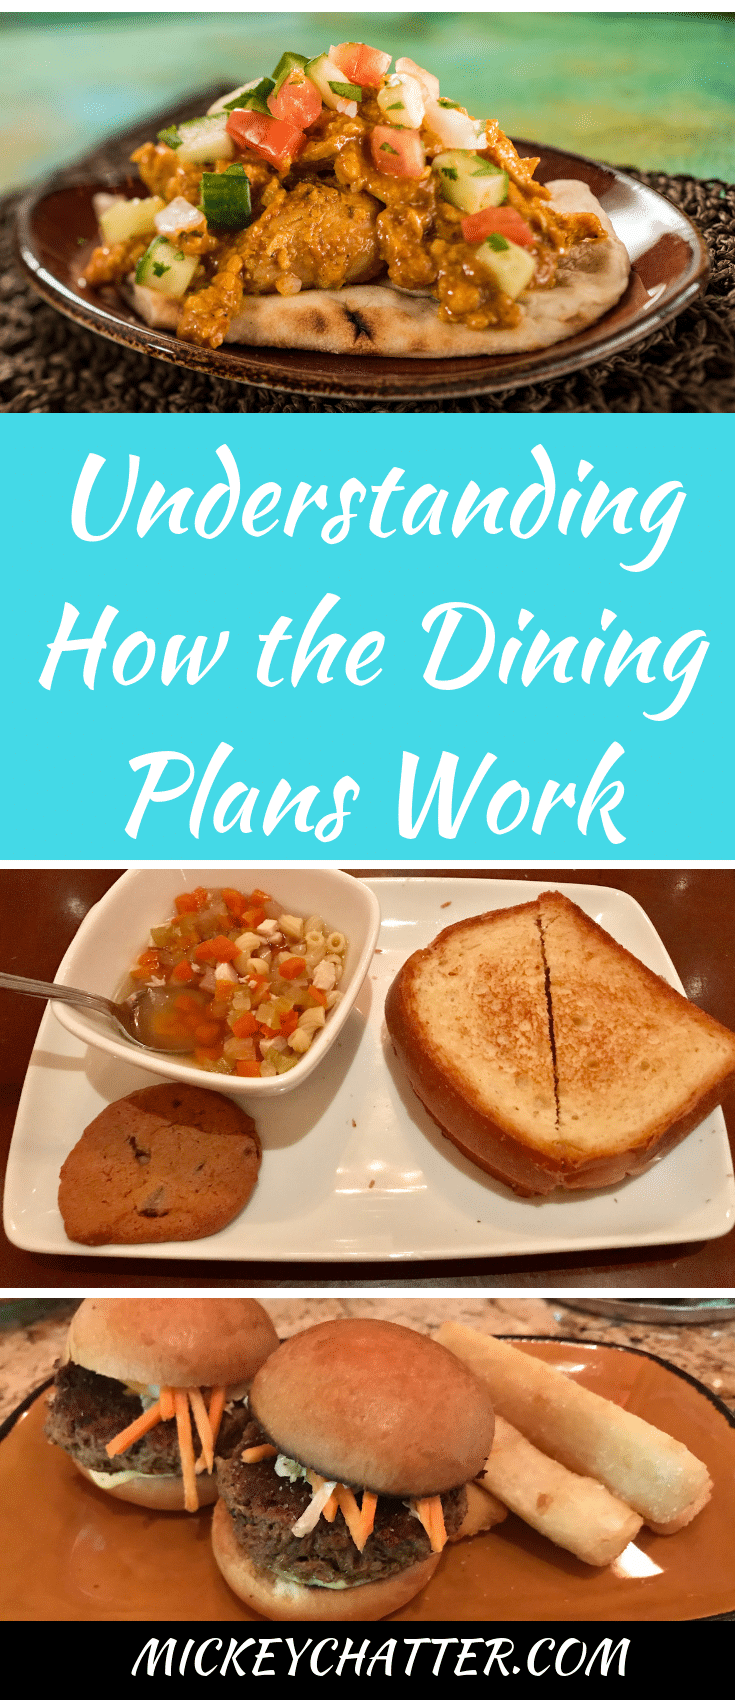 Understanding the Disney World dining plans and how they work. How to know which one is right for you! #disneyworld #disneydining #disneydiningplans #disneyfood #disneyvacation #disneytrip #disneyplanning